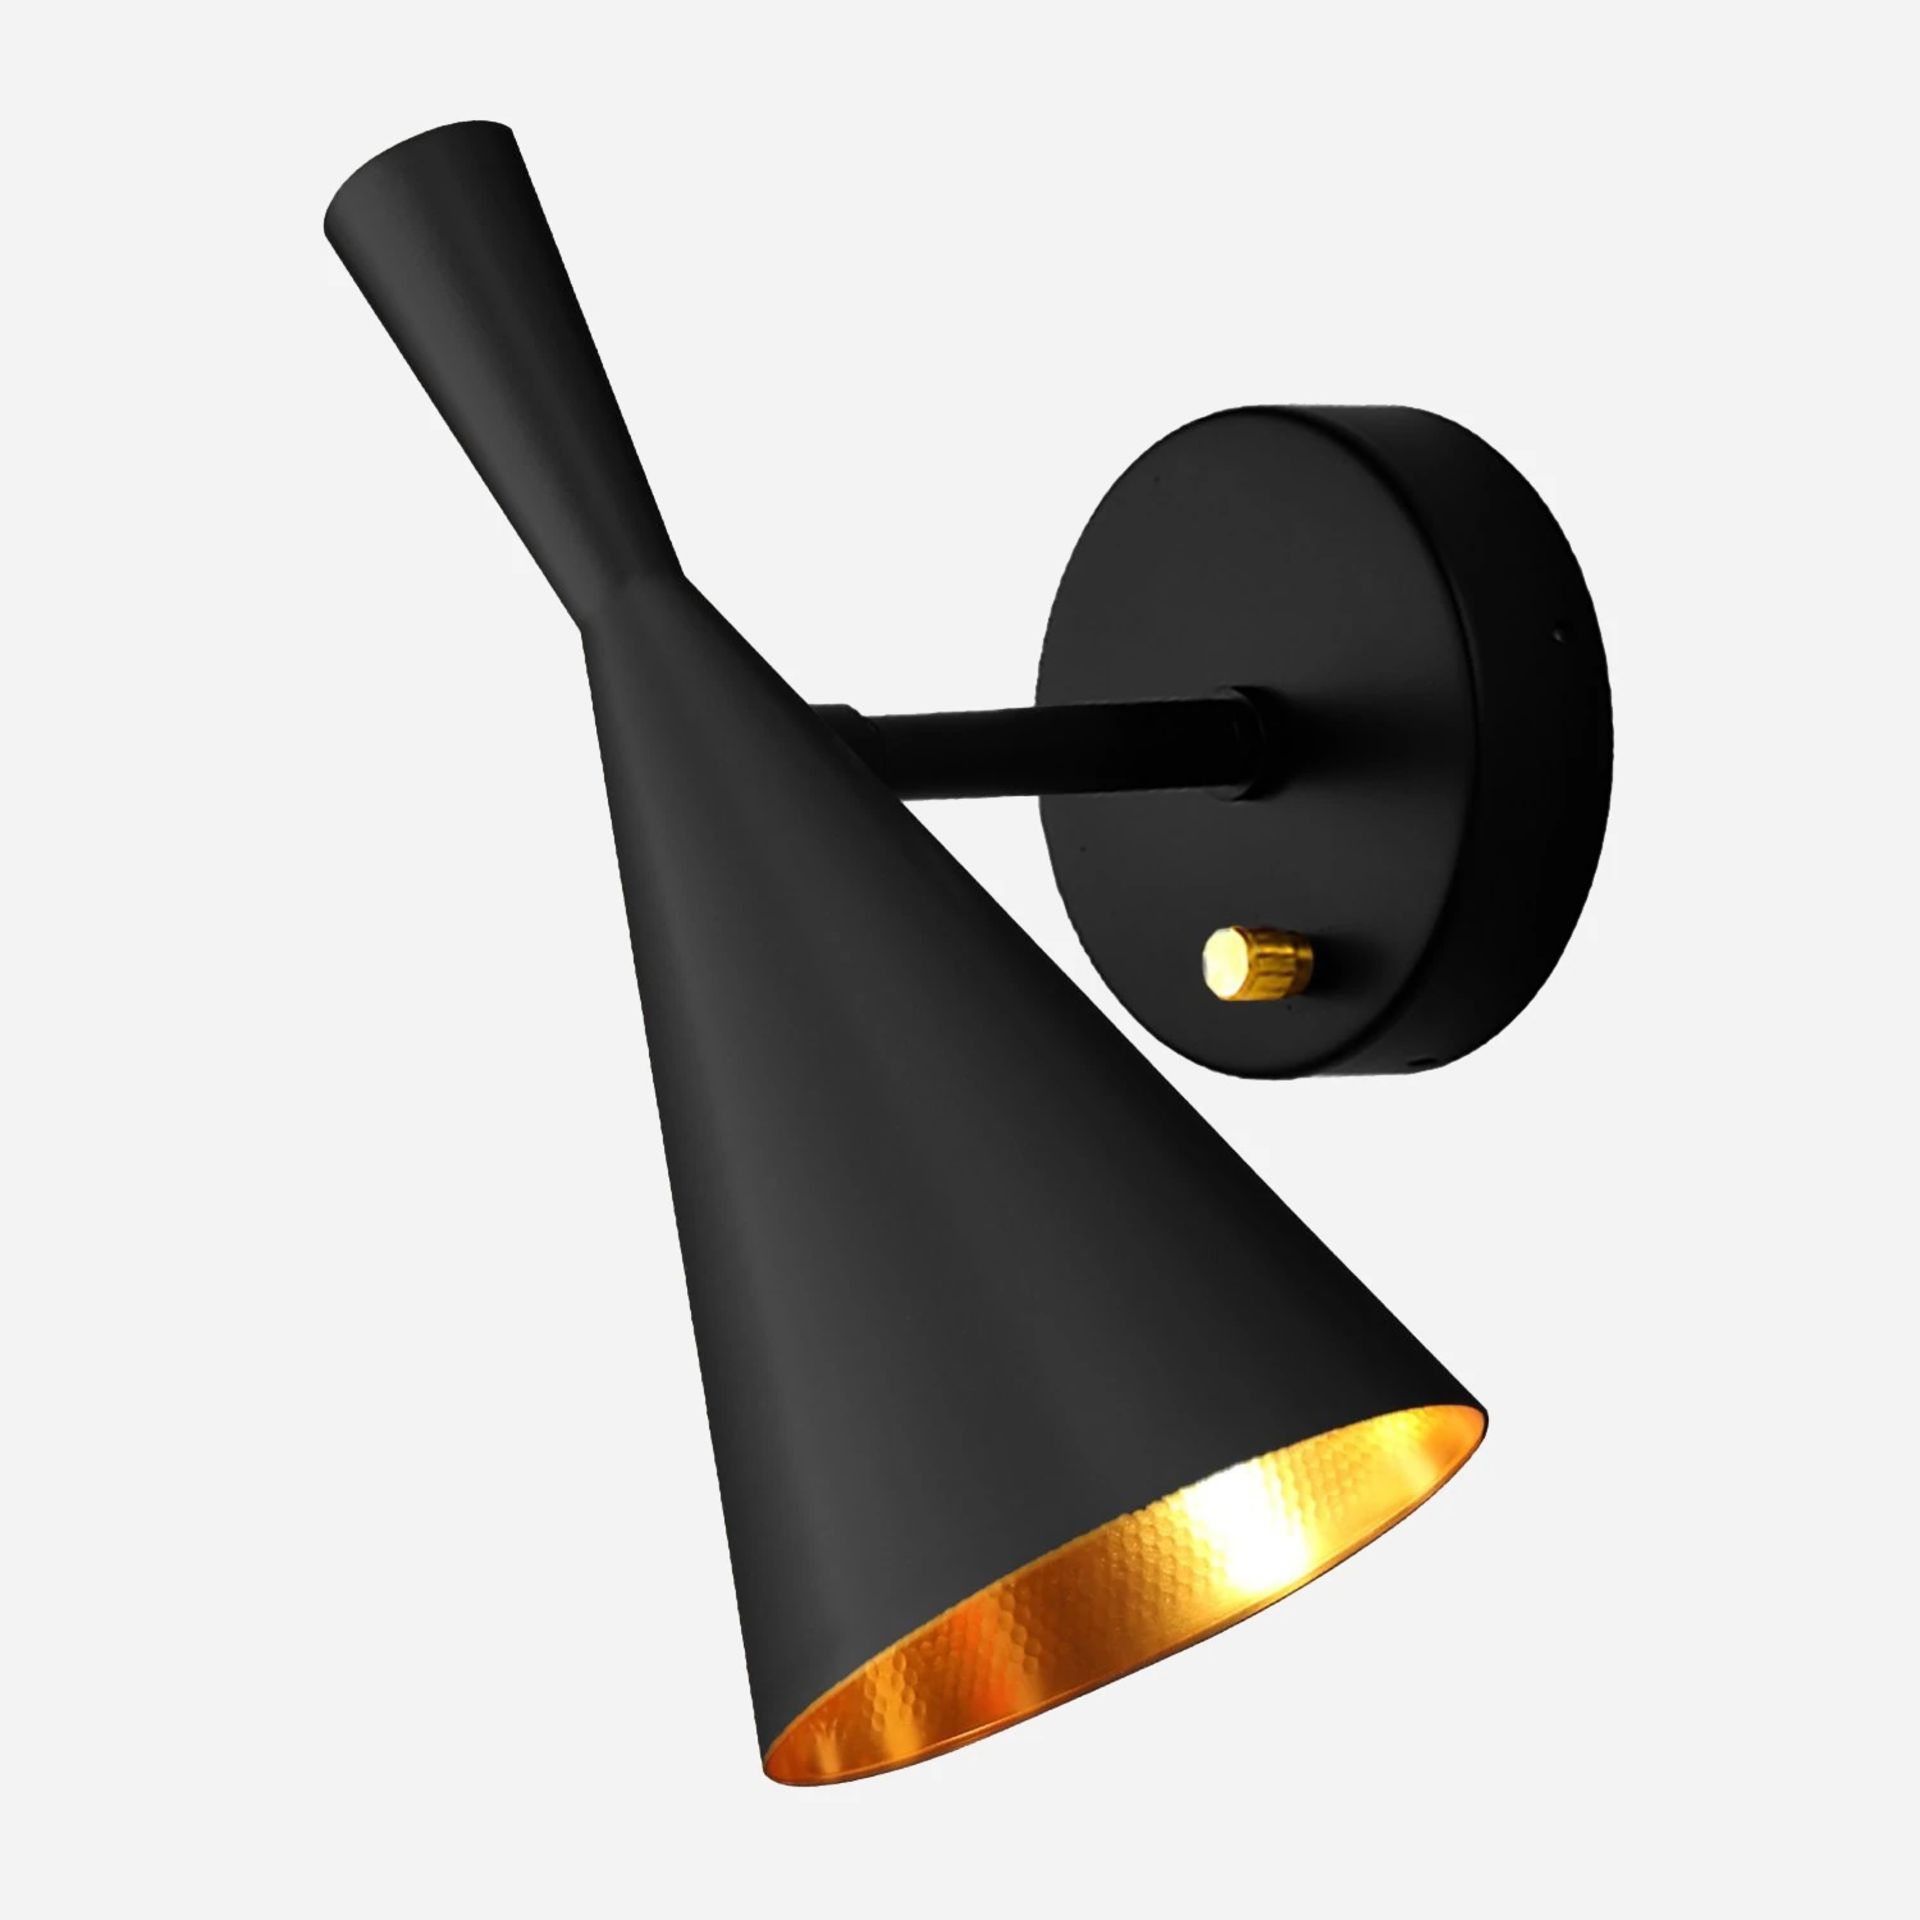 Funk Wall Light Balck A sleek range for contemporary living, The Funk Wall Light is inspired by